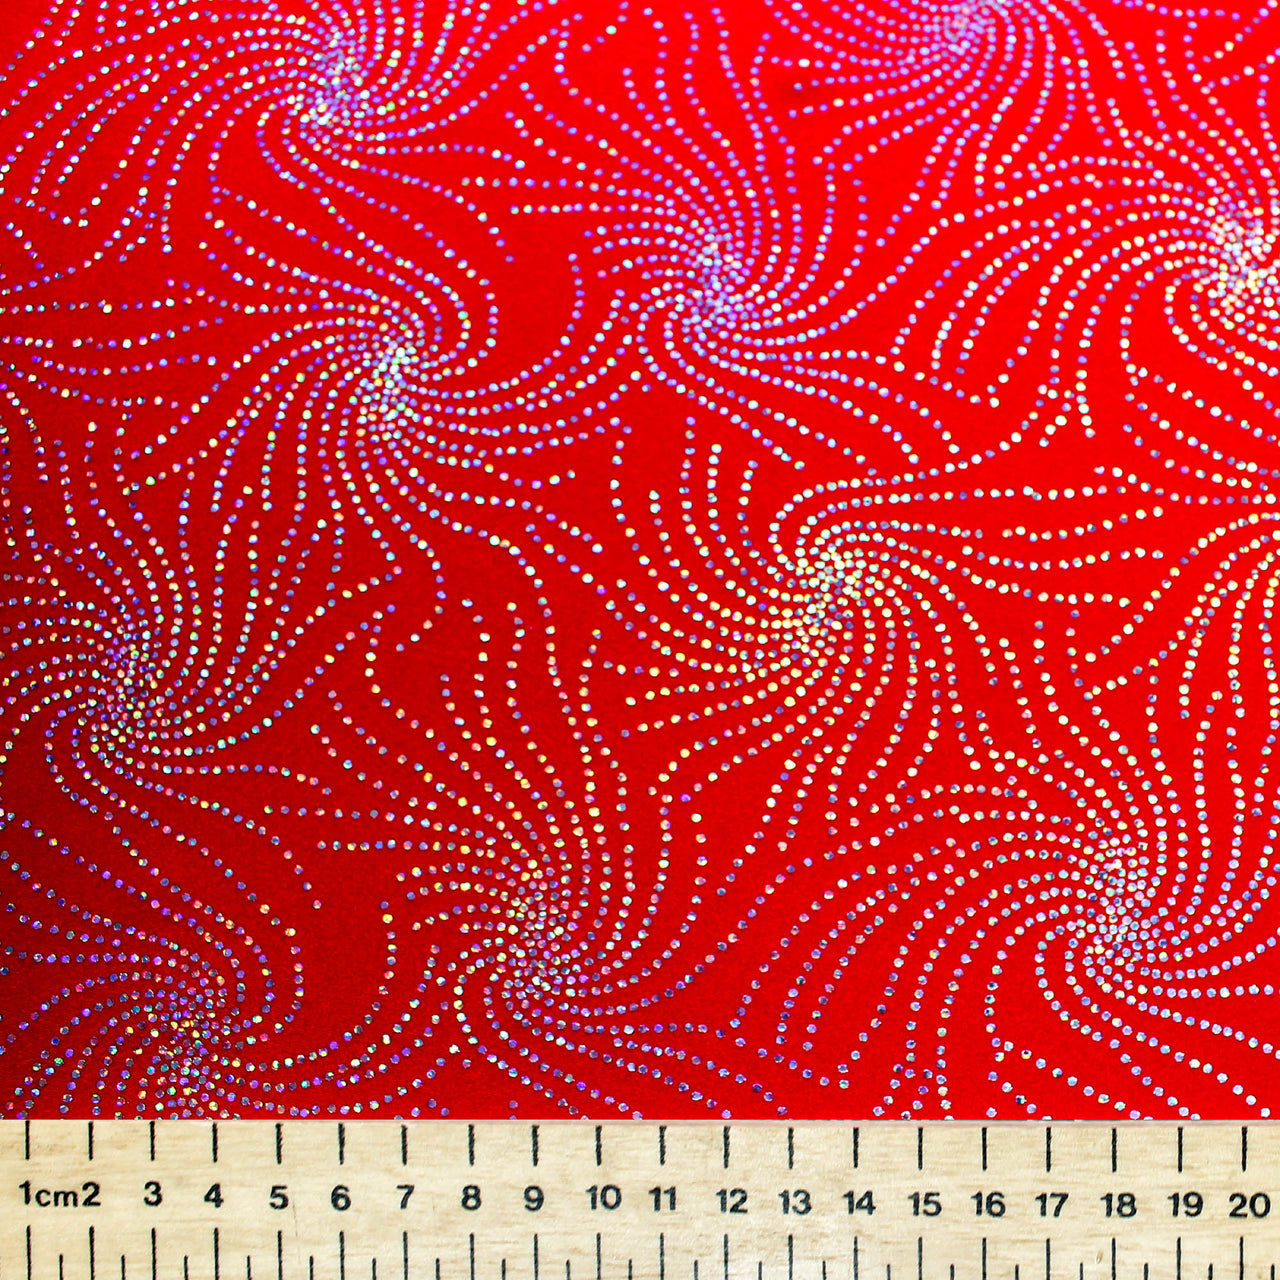 Rouge - Starburst Firework Fabric Hologram Sequin all way (4 way) stretch pour justaucorps